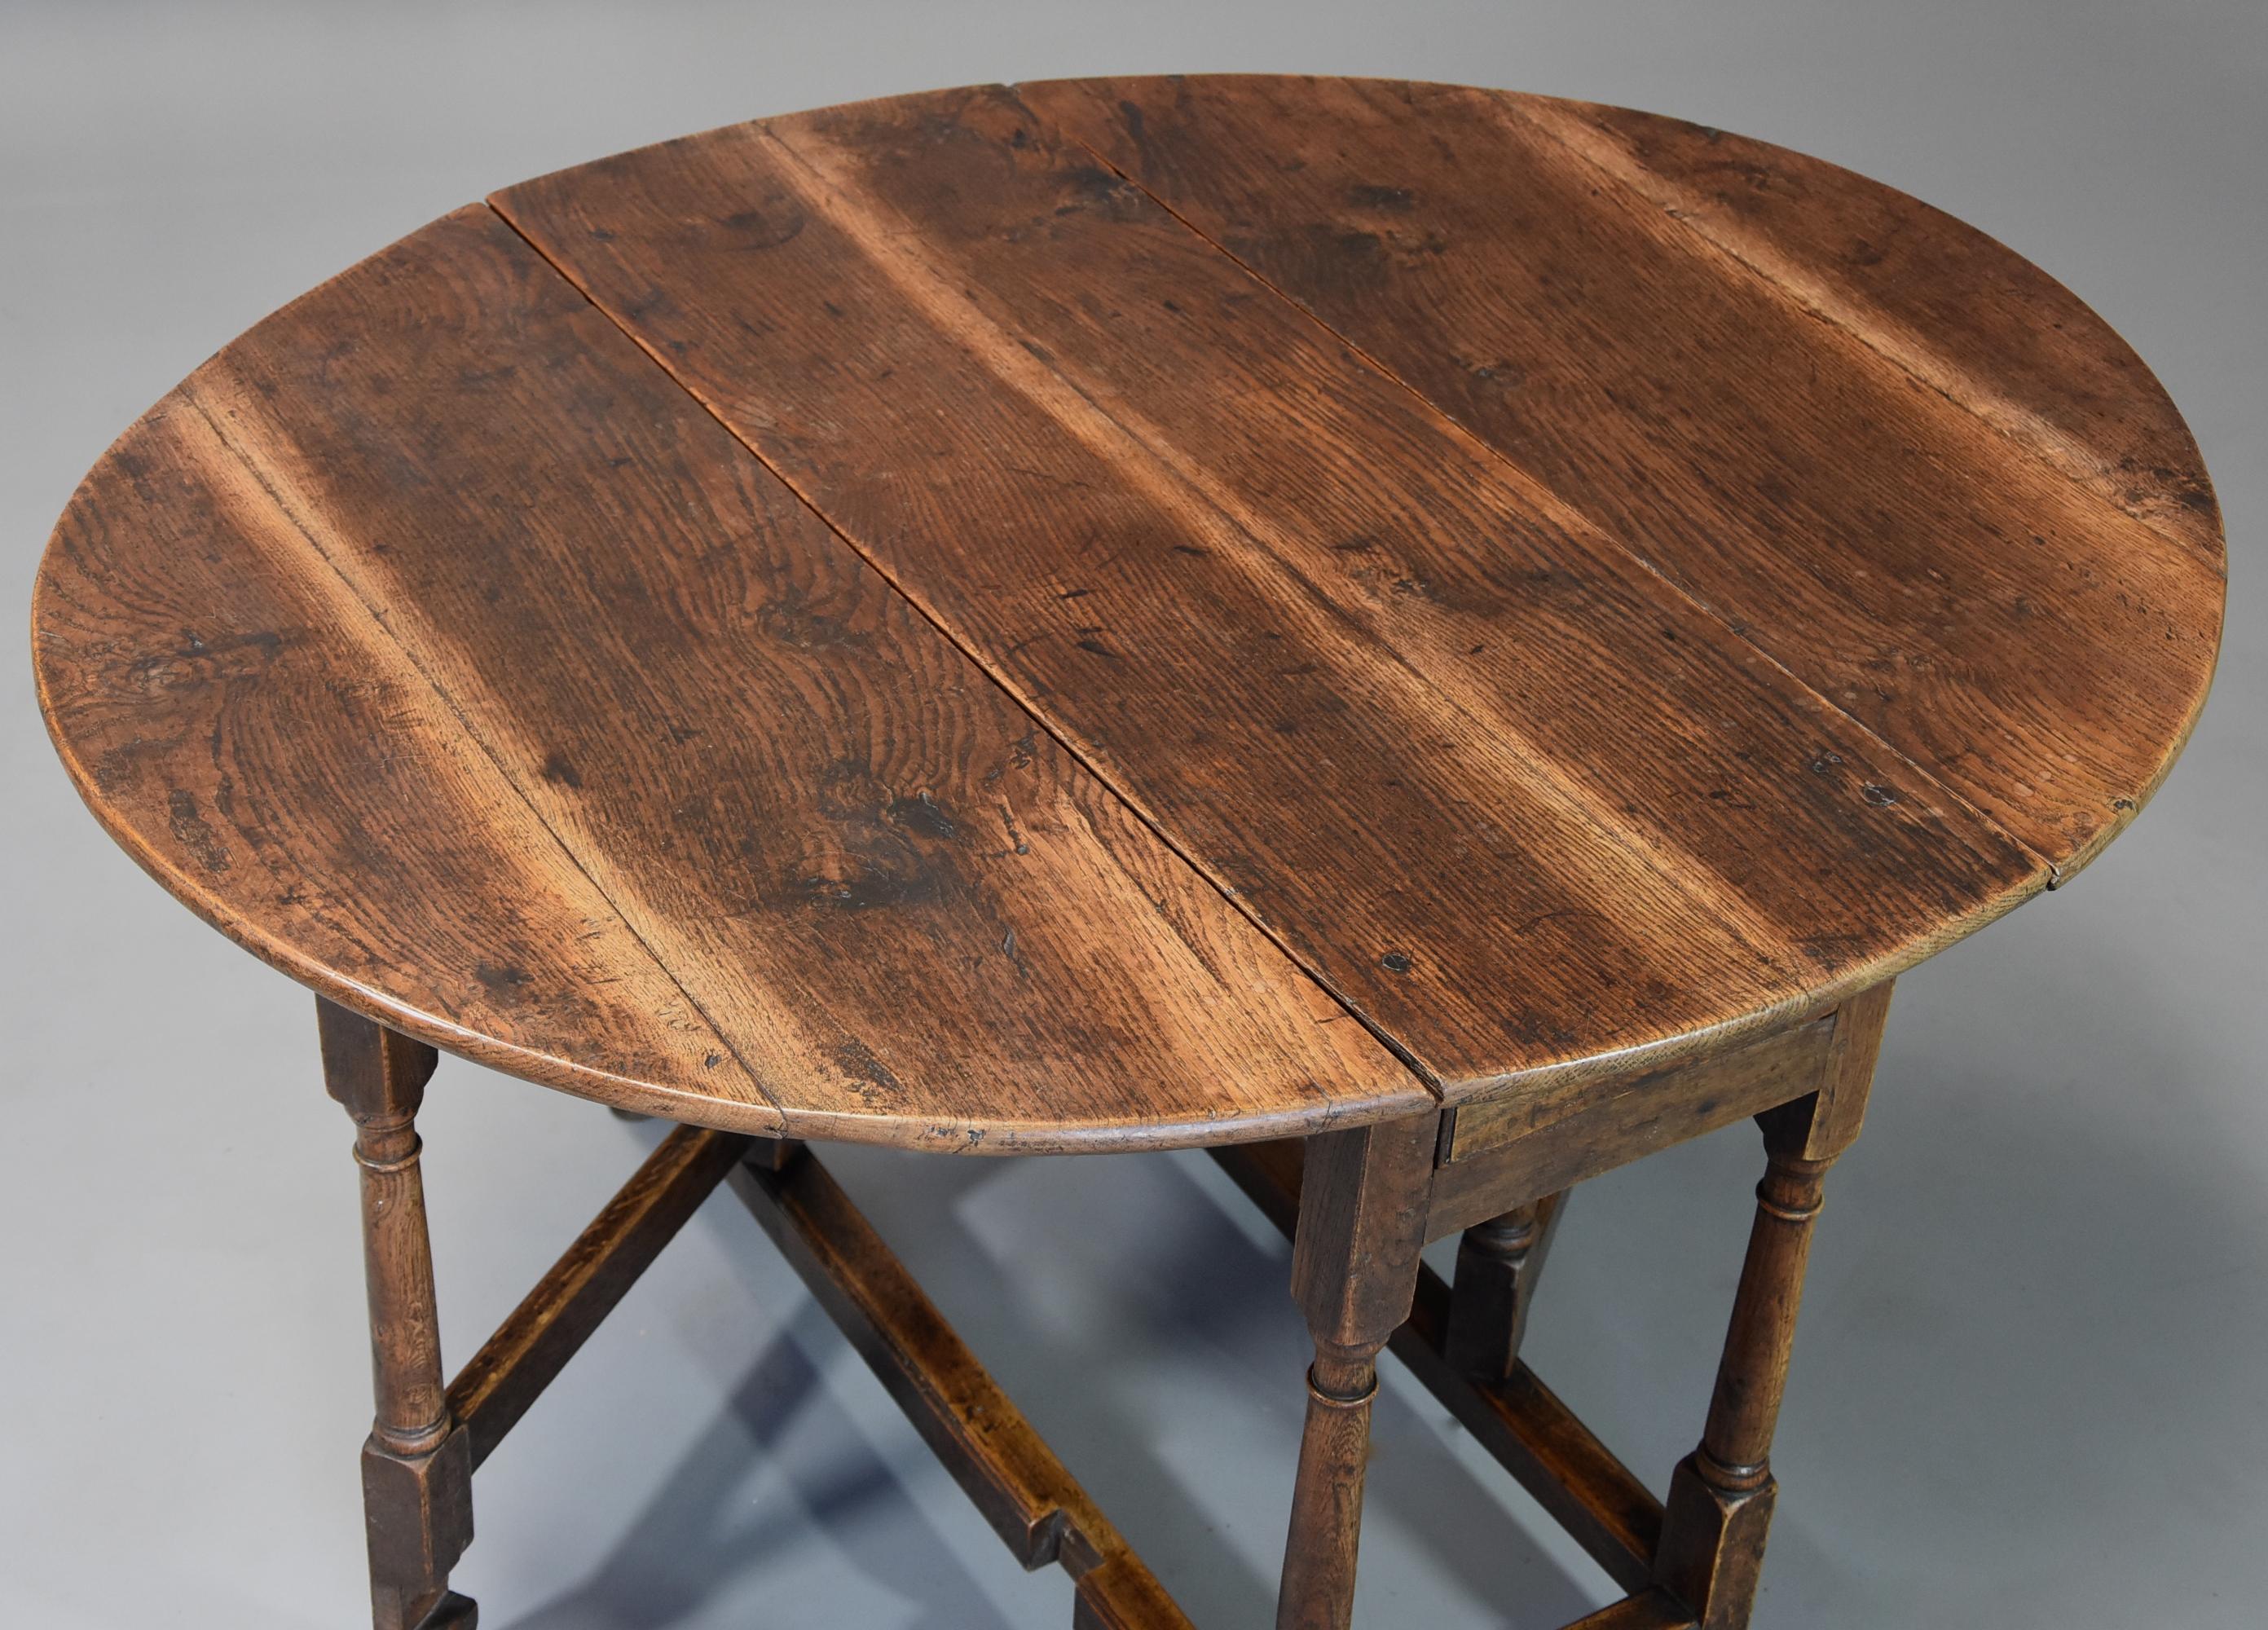 English Early 18th Century Oak Gateleg Table with Superb Original Patina For Sale 3